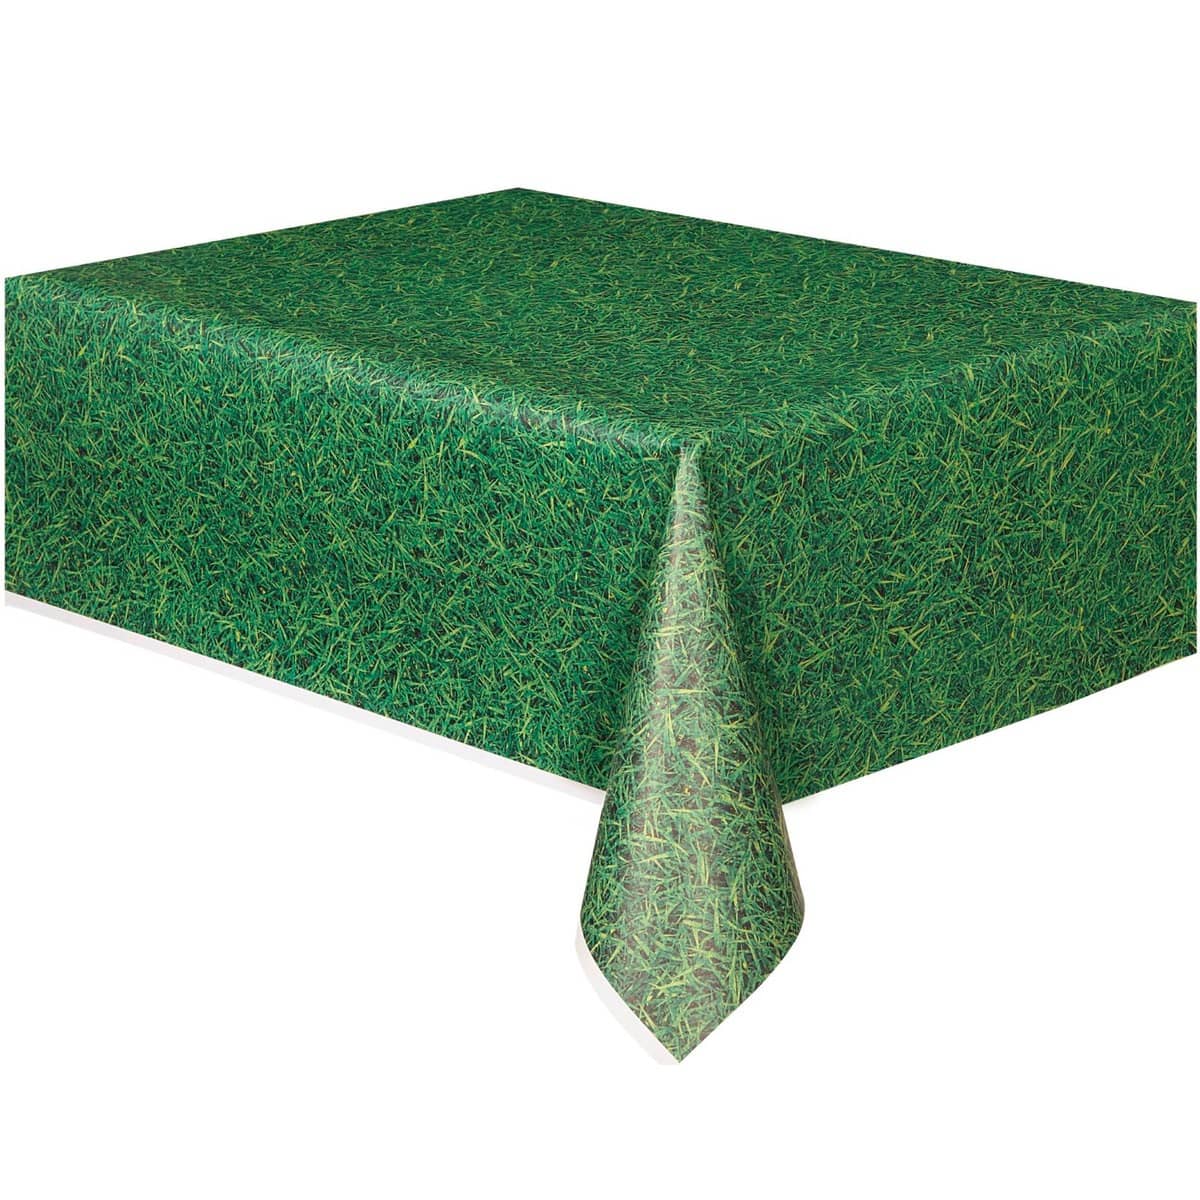 Green Grass Printed Plastic Table Cover Tablecloth